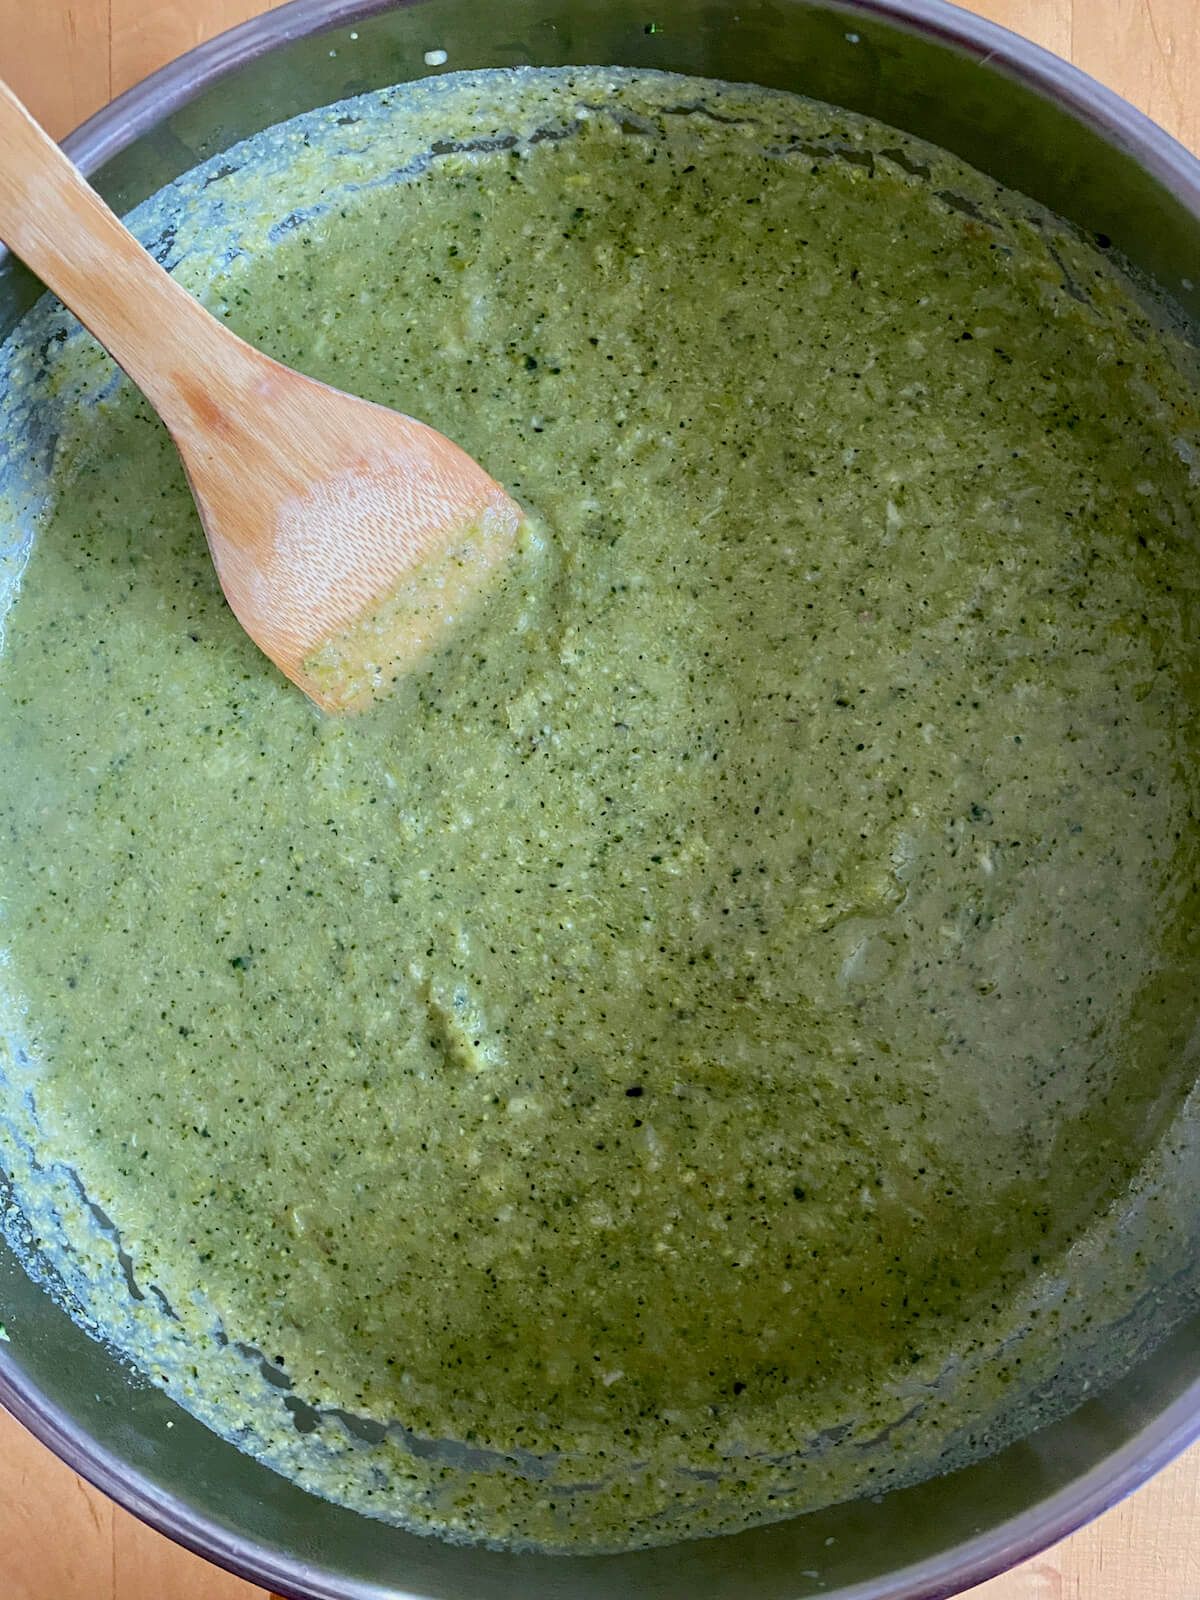 The puréed broccoli and asparagus soup in a stainless steel pot.